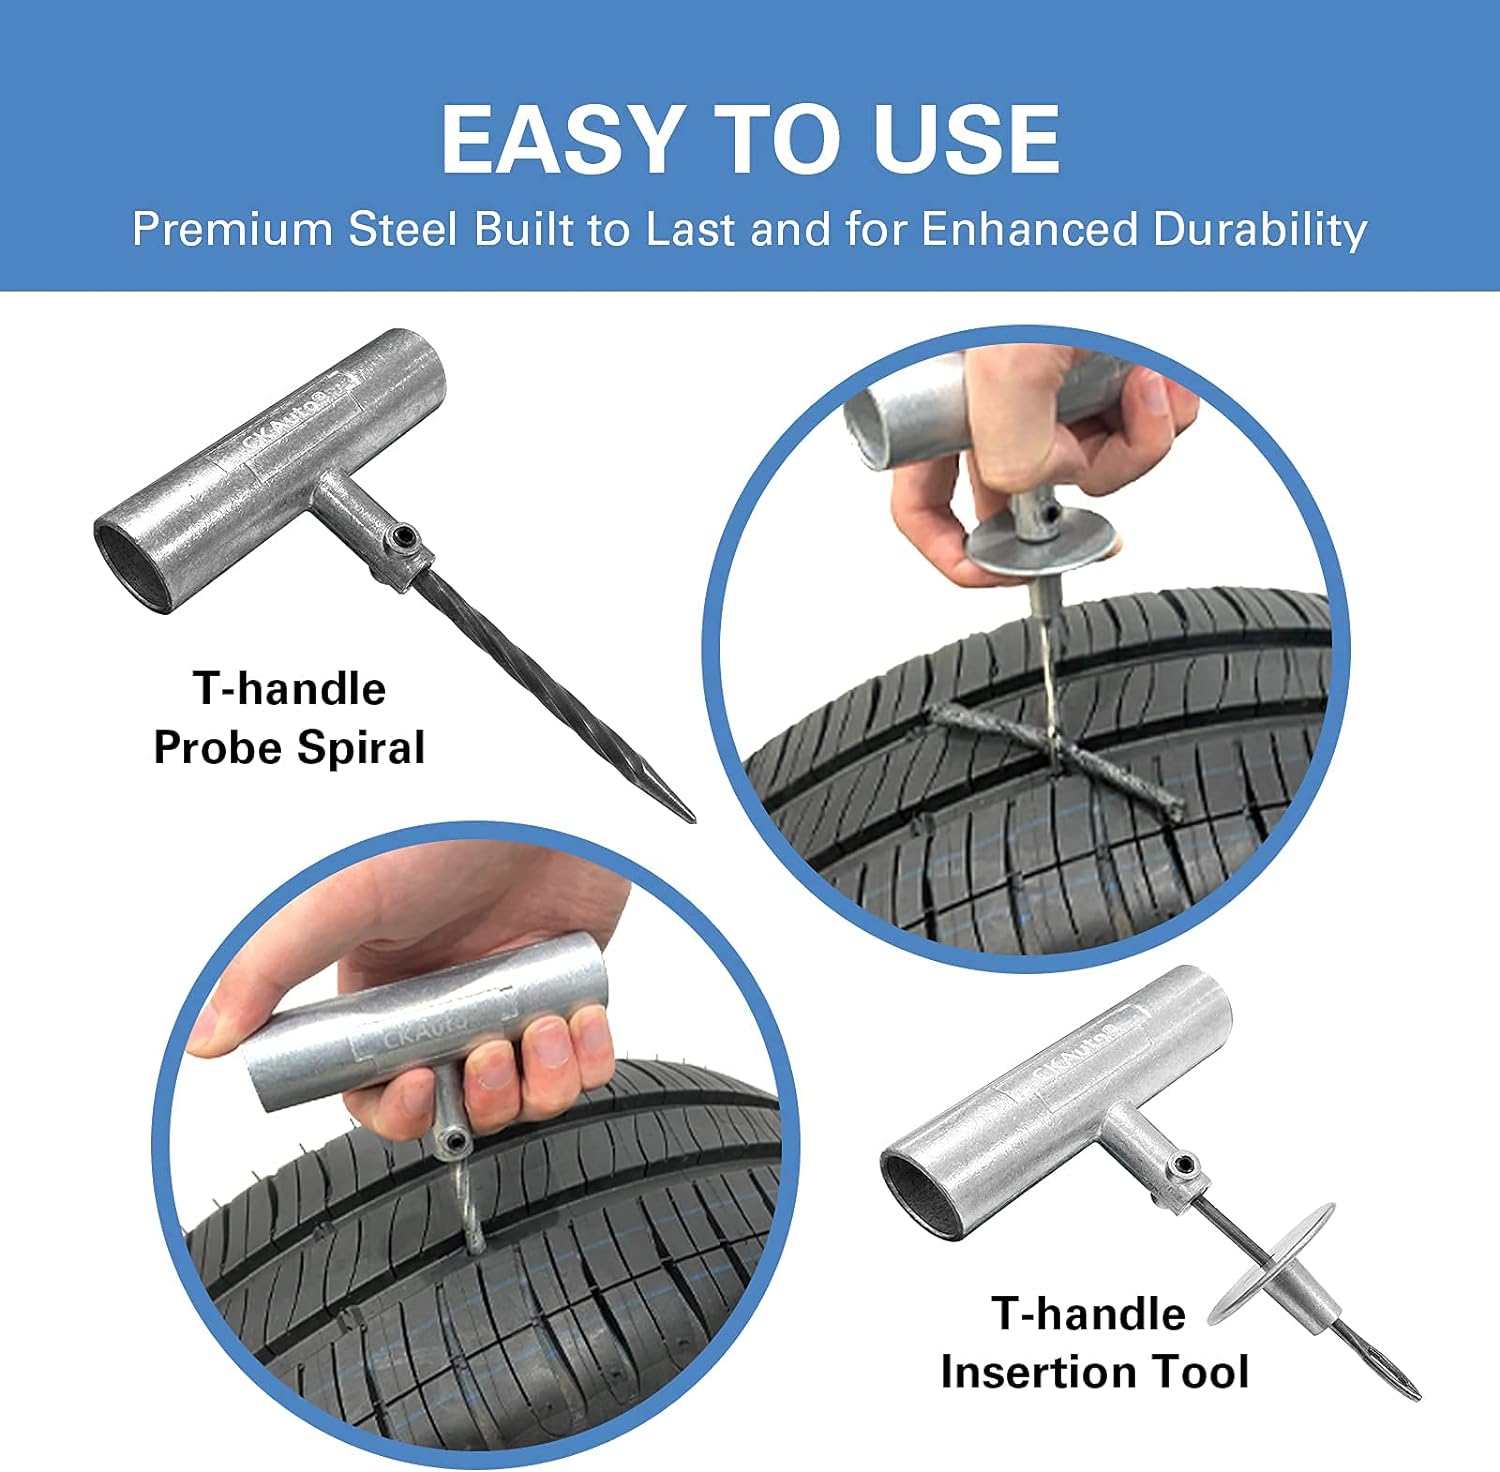 Universal Tire Repair Kit, Heavy Duty Car Emergency Tool Kit for Flat Tire Puncture Repair, 36 Pcs Value Pack, Tire Plug Kit Fit for Autos, Cars, Motorcycles, Trucks, Rvs, Etc.